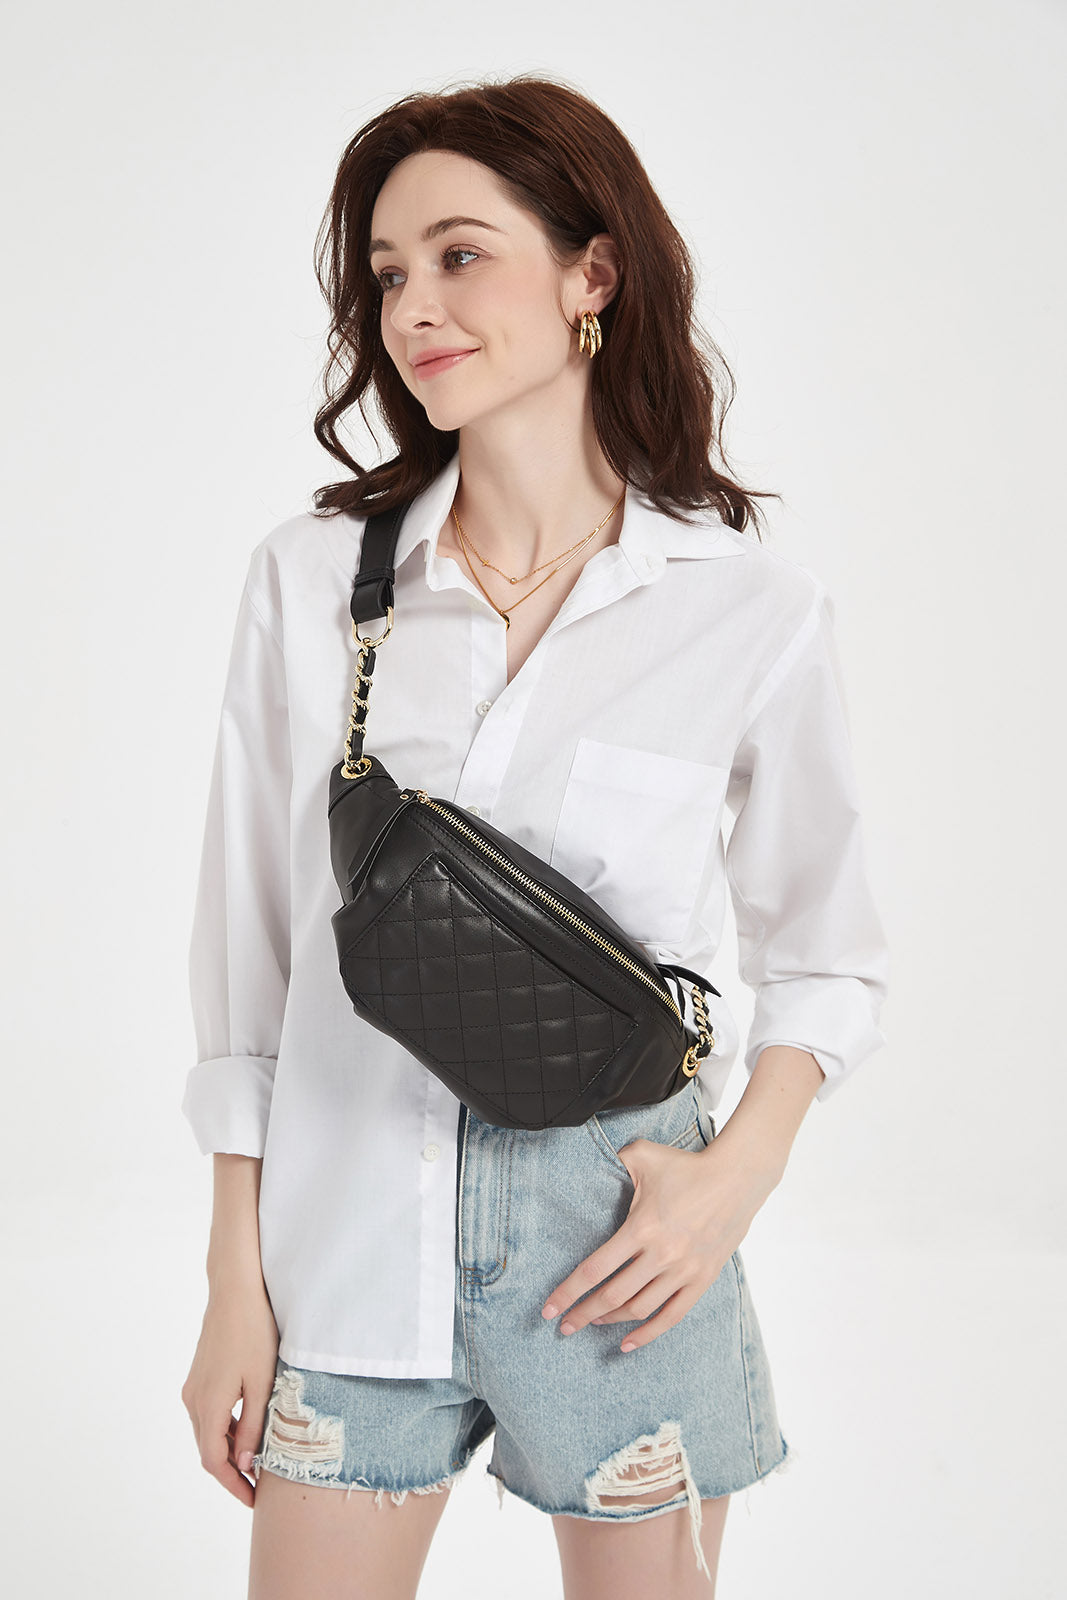 HIMODA quilted fanny pack - black leather - details 2